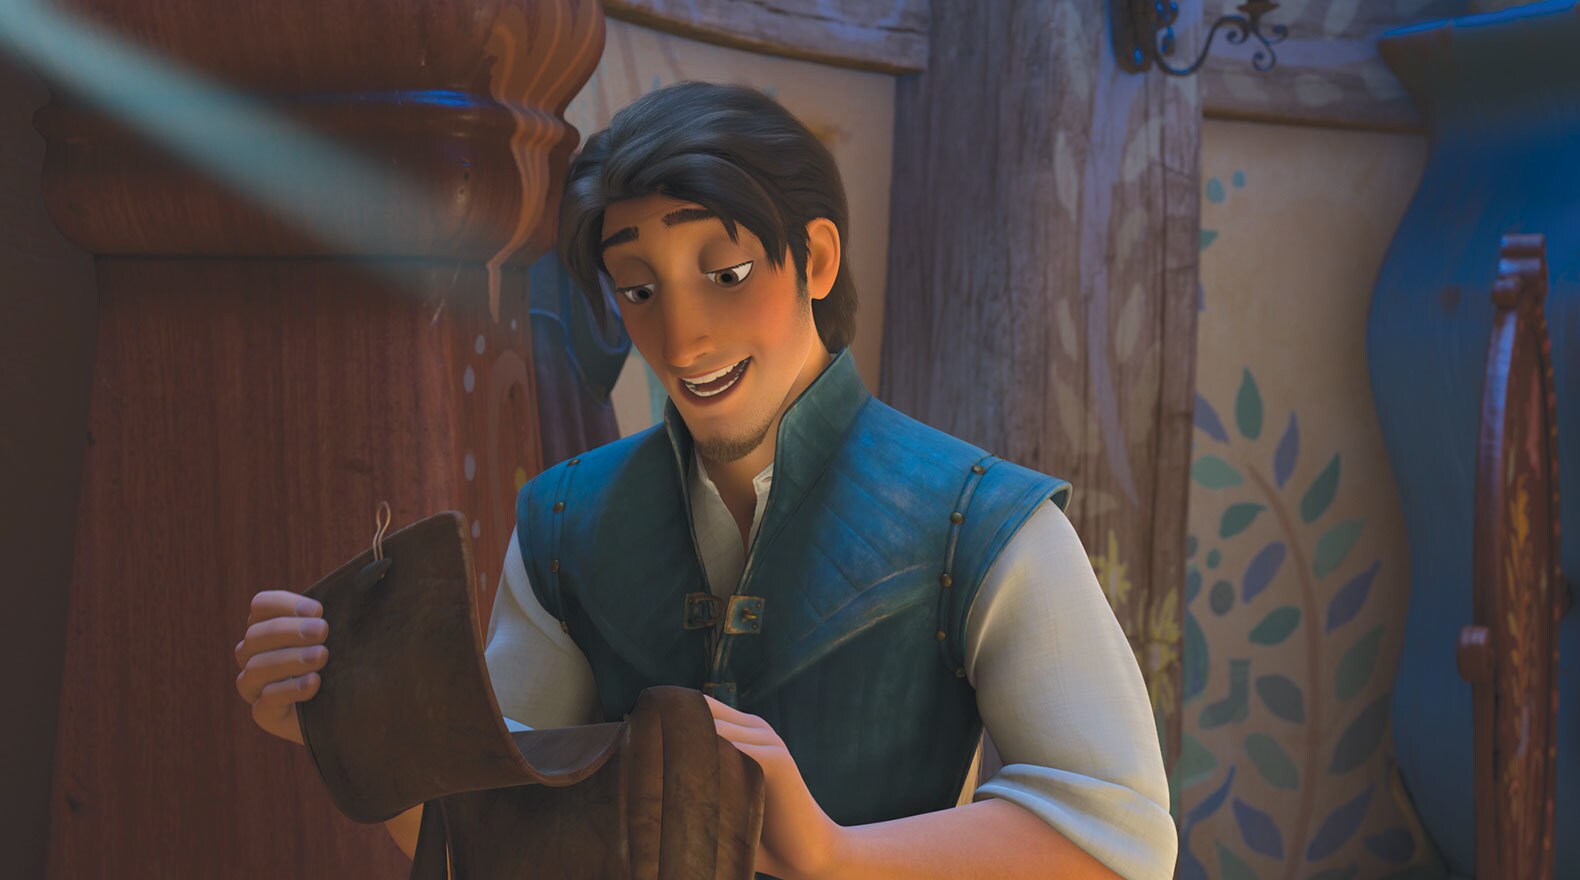 Flynn Rider holding a satchel in the movie Tangled